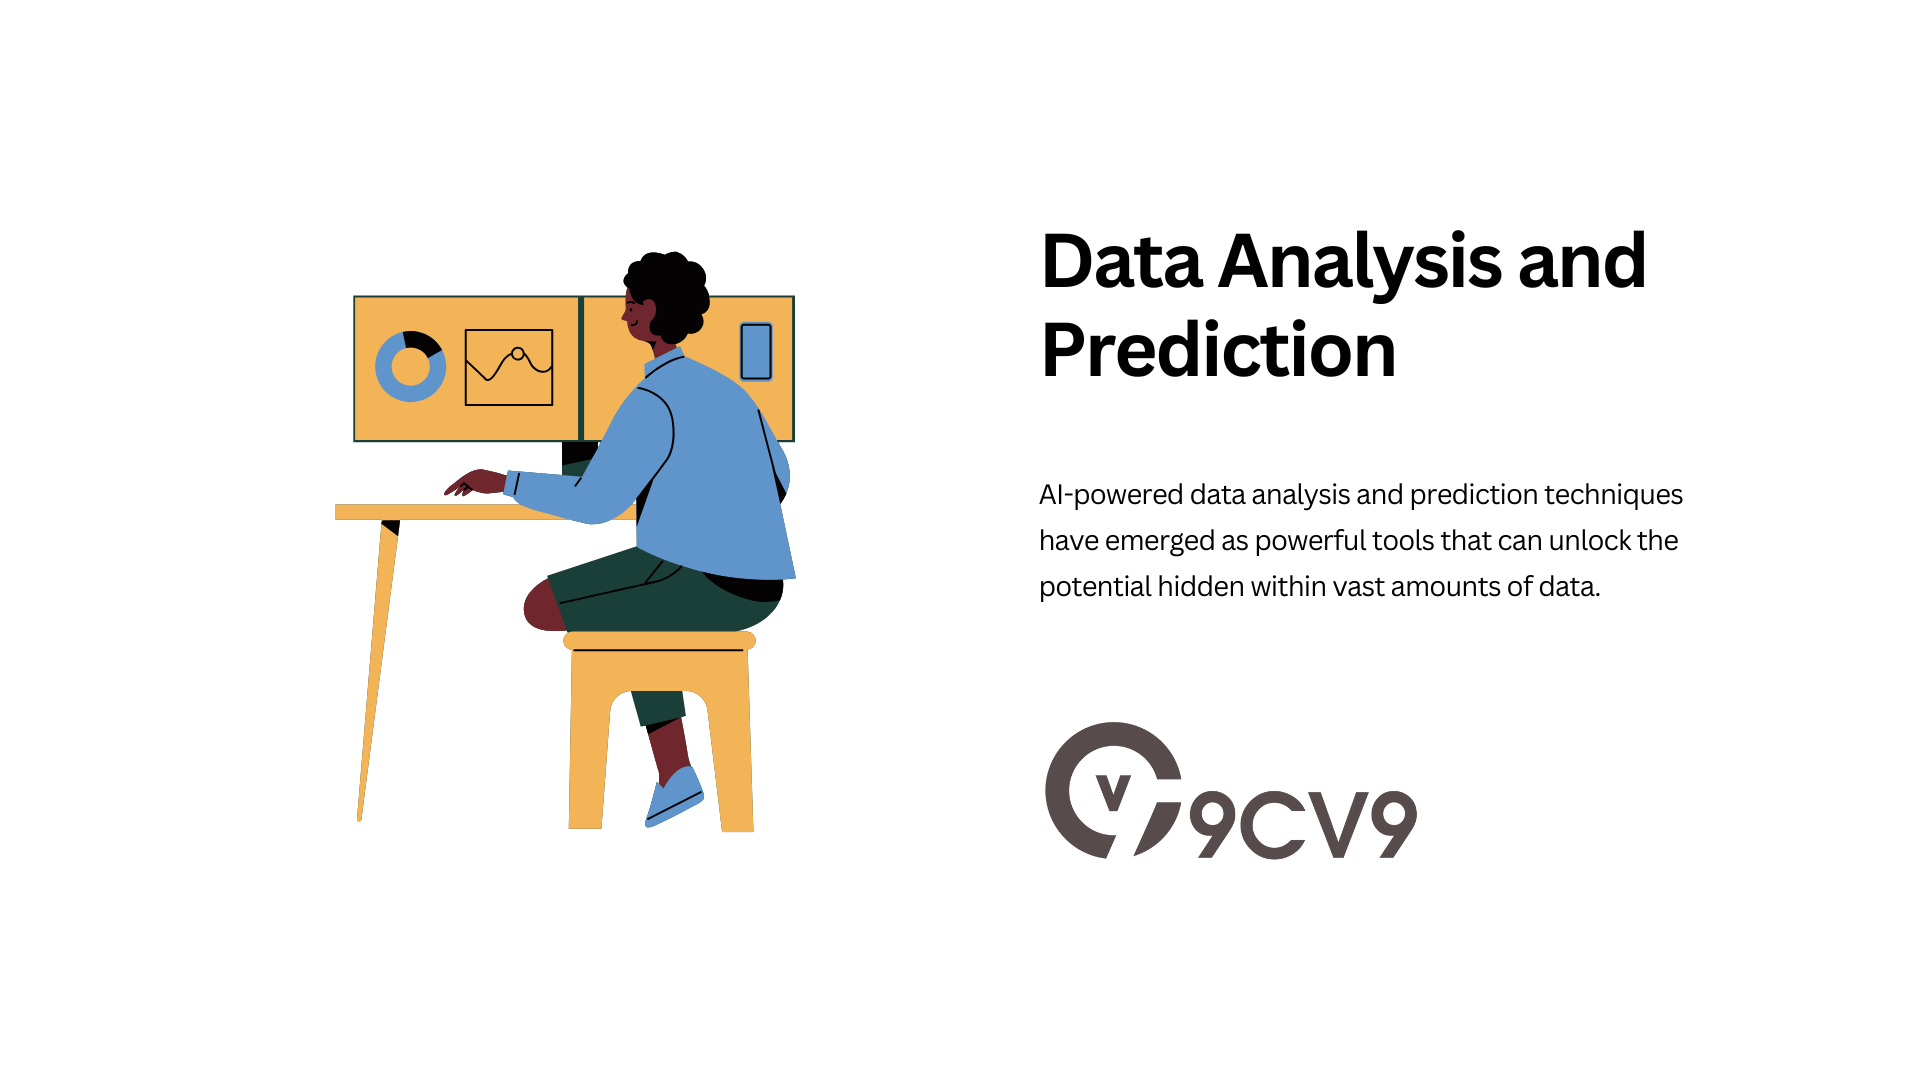 Data Analysis and Prediction - Unleashing Insights with AI